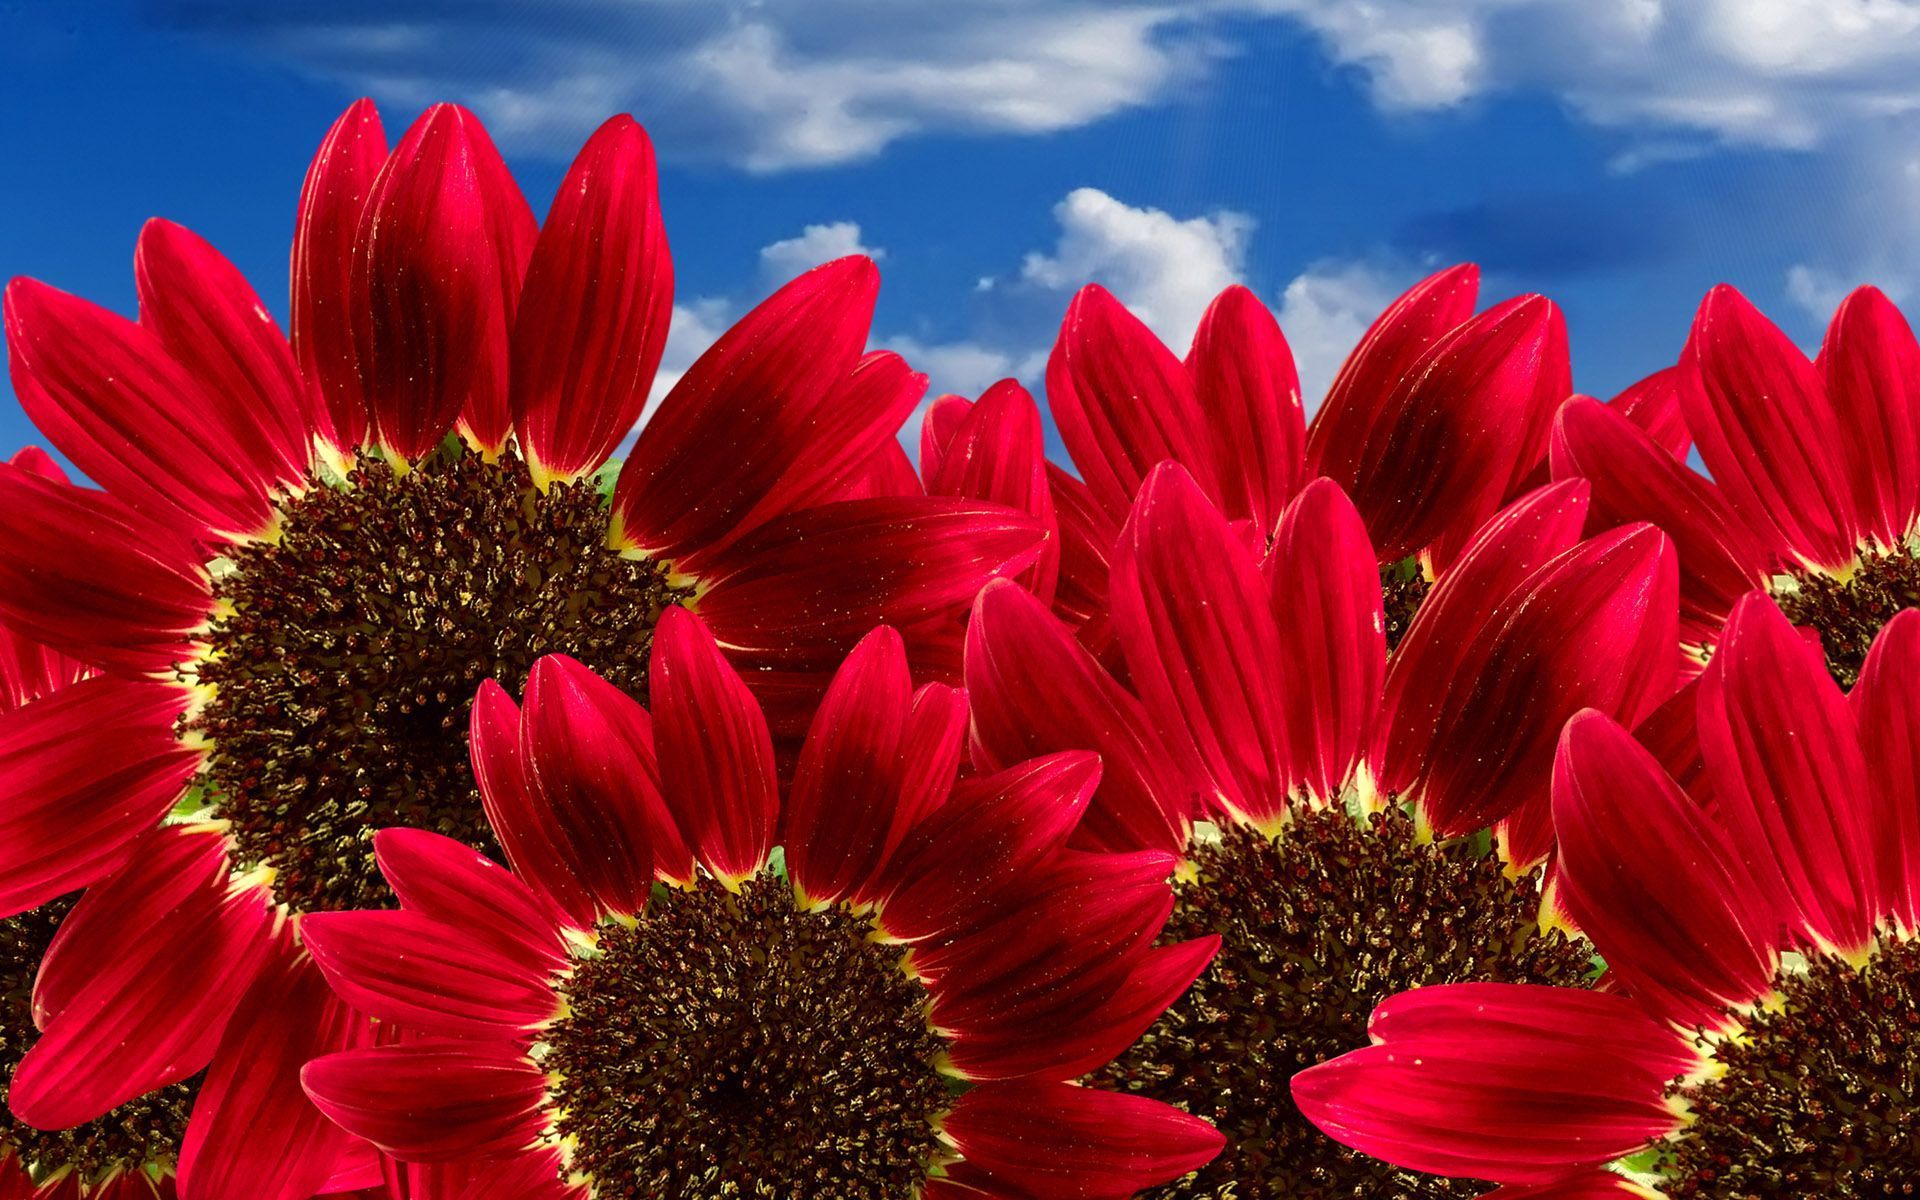 Pure Red Sunflowers Wallpapers | HD Wallpapers